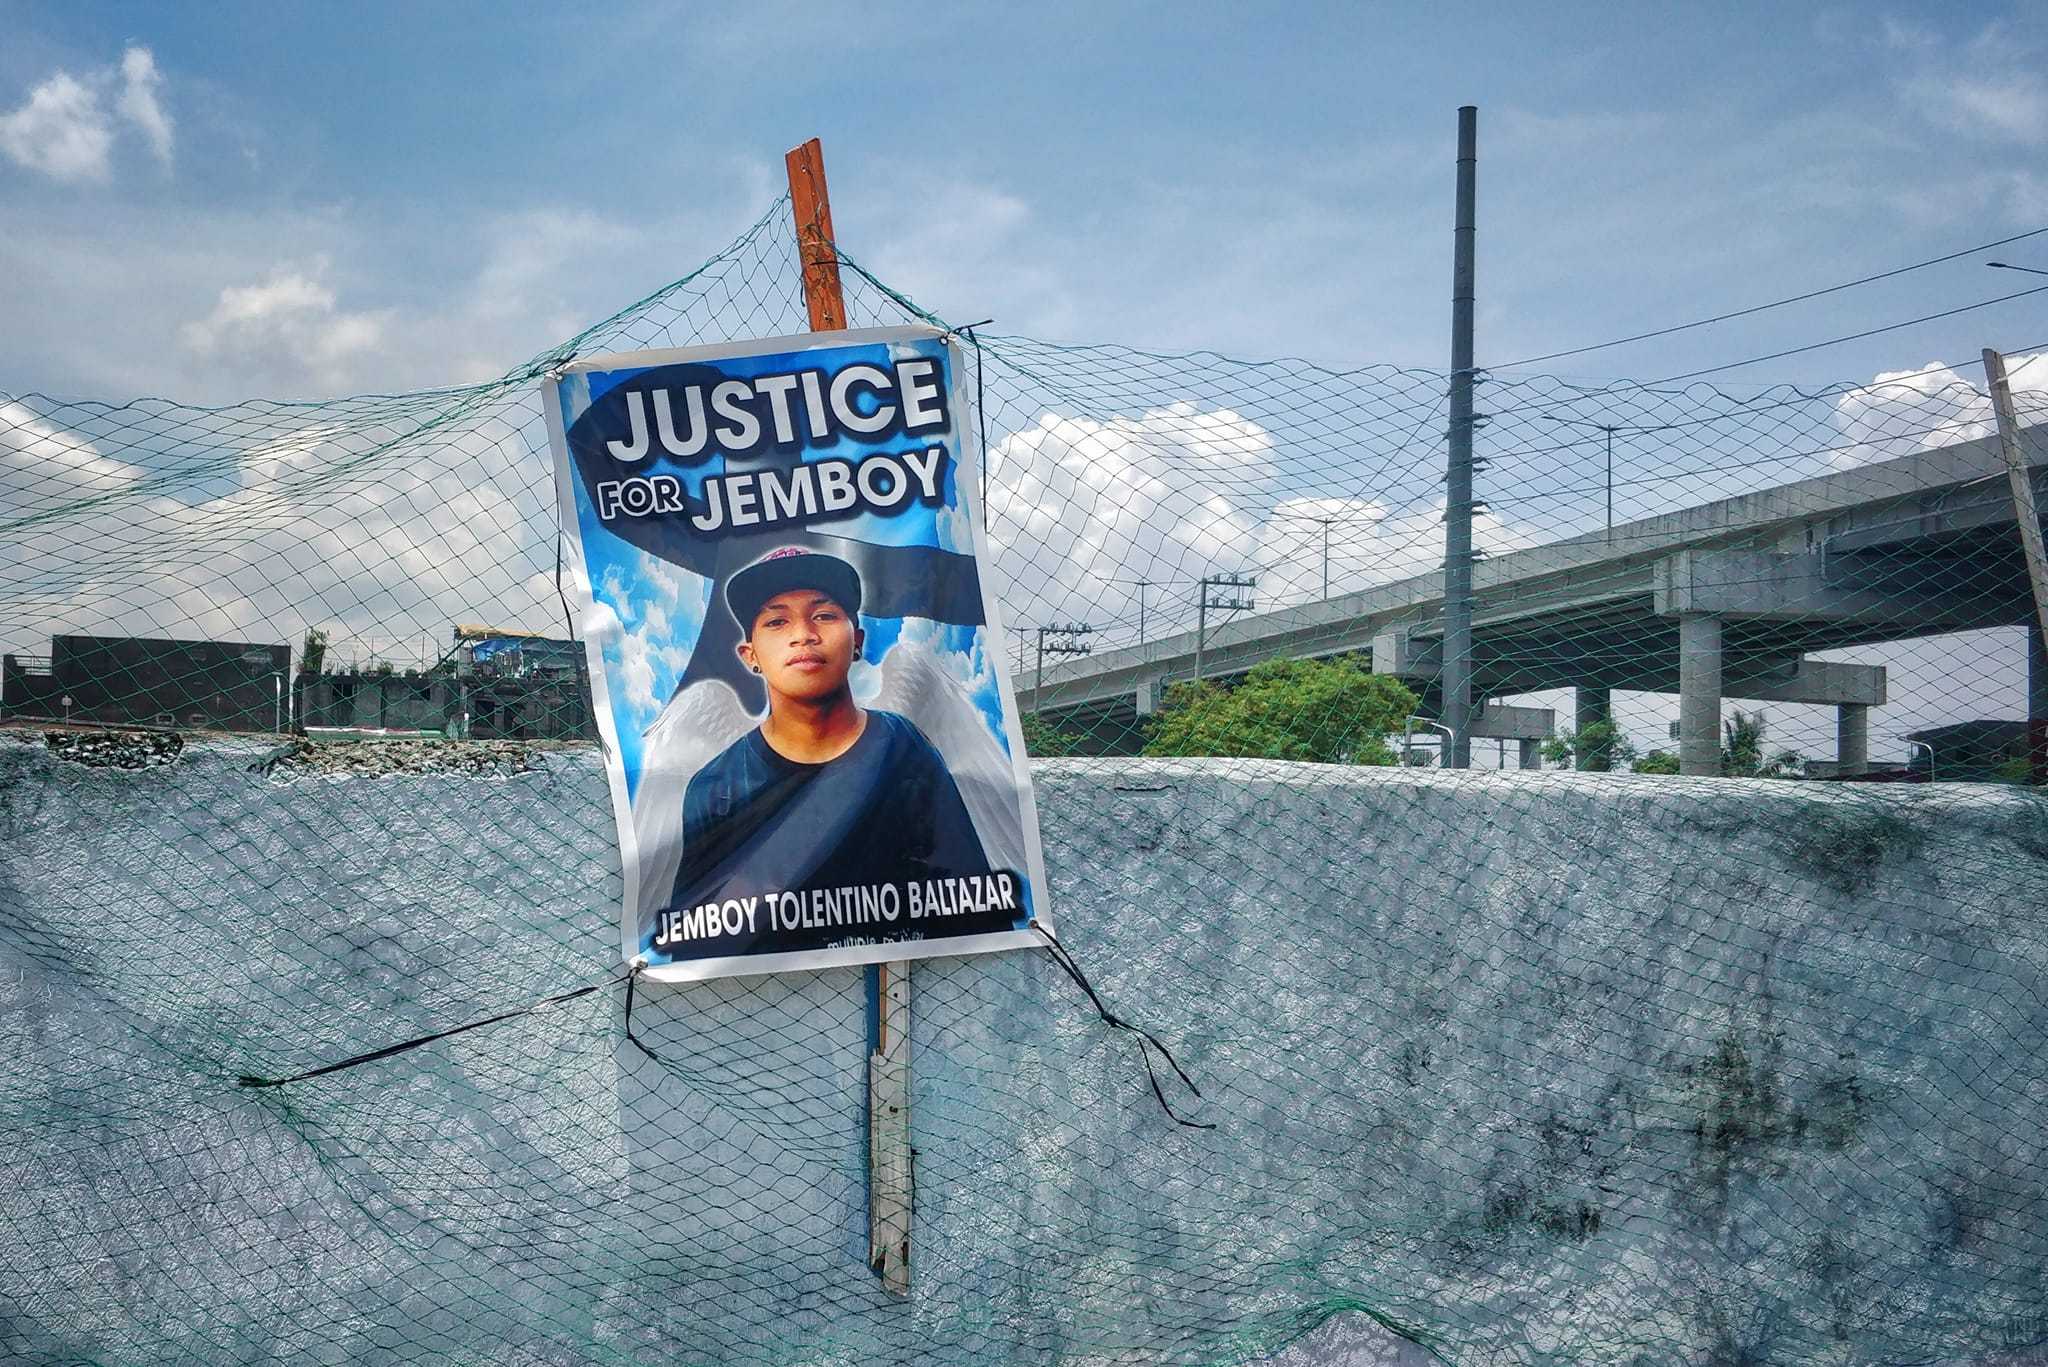 PNP to revisit level of accountability after Navotas teen slay – Abalos